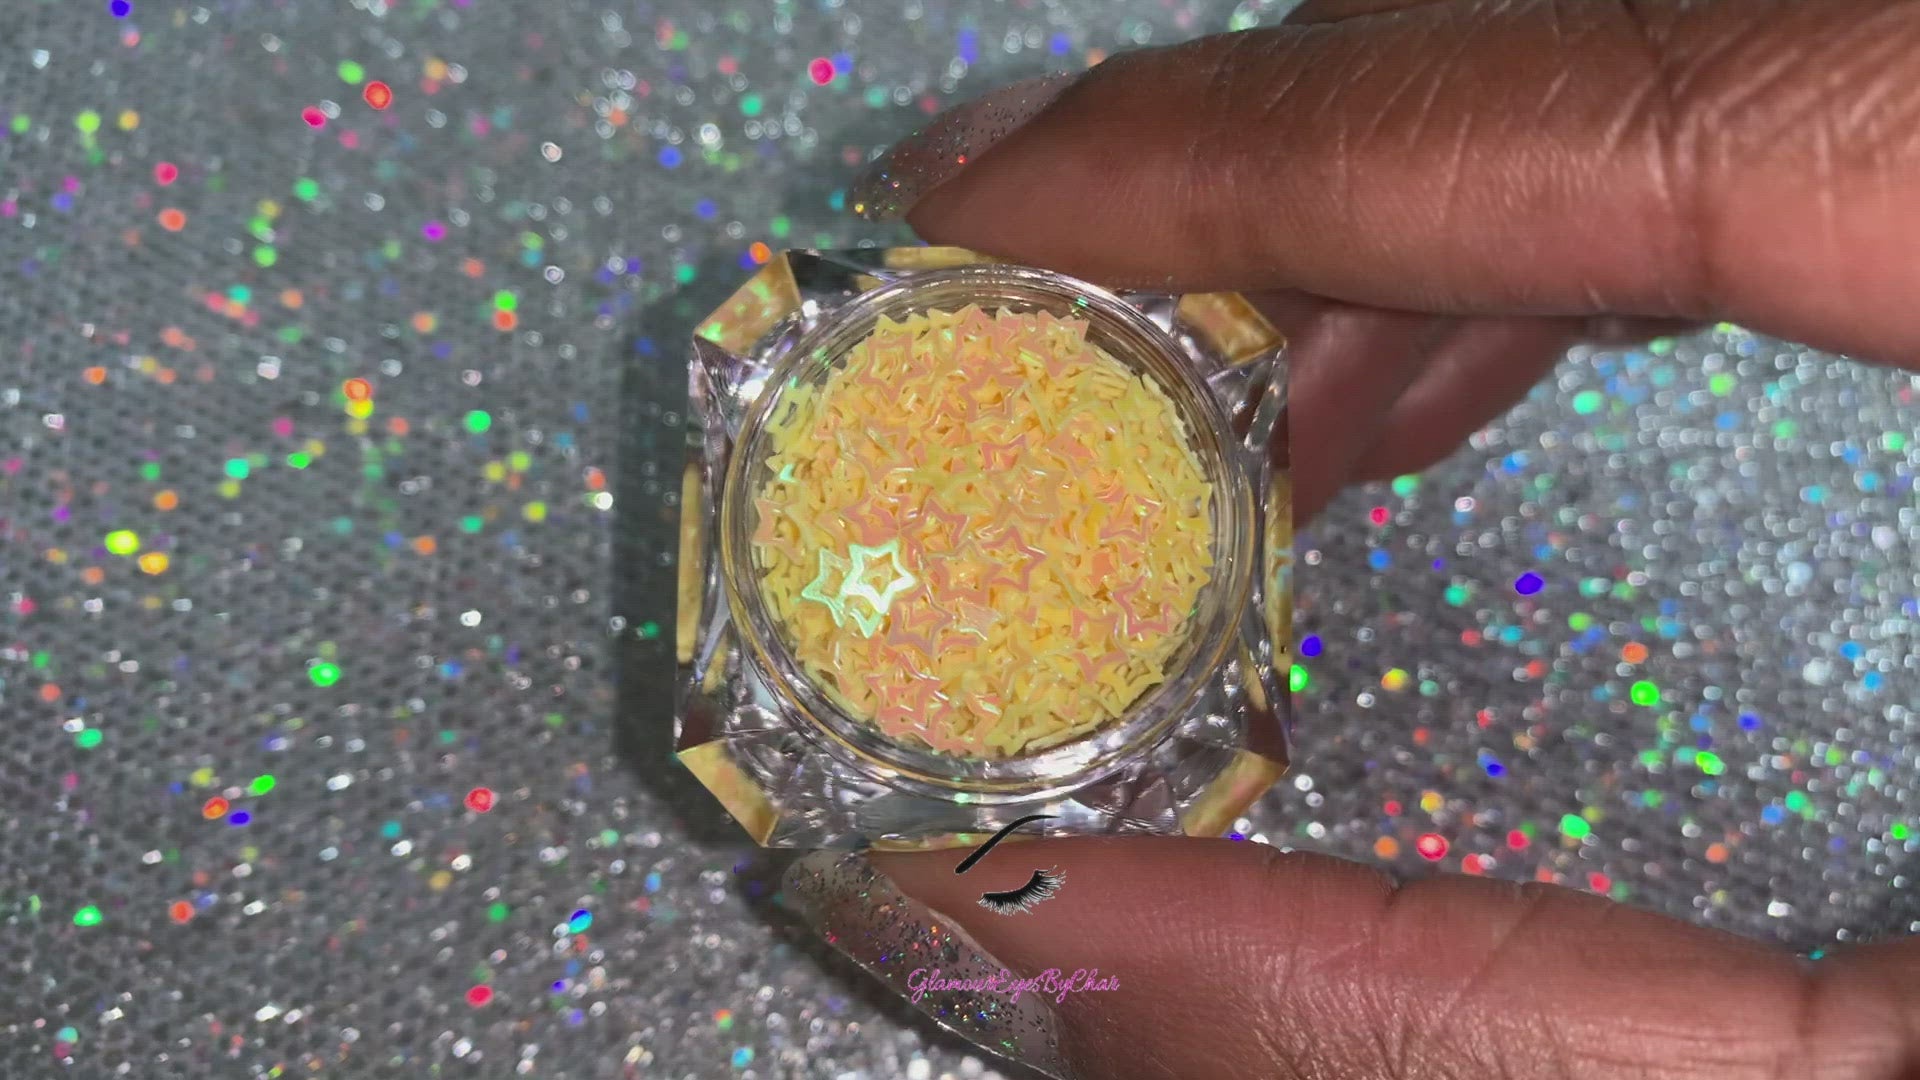 This glitter is called Yellow Stars and is part of the shaped glitters collection. It consists of banana yellow small and large stars with an iridescent sparkle. Yellow Stars is perfect for body and nail art or DIY projects. Comes in 5g jars only. **Glitter will be discontinued once sold out**